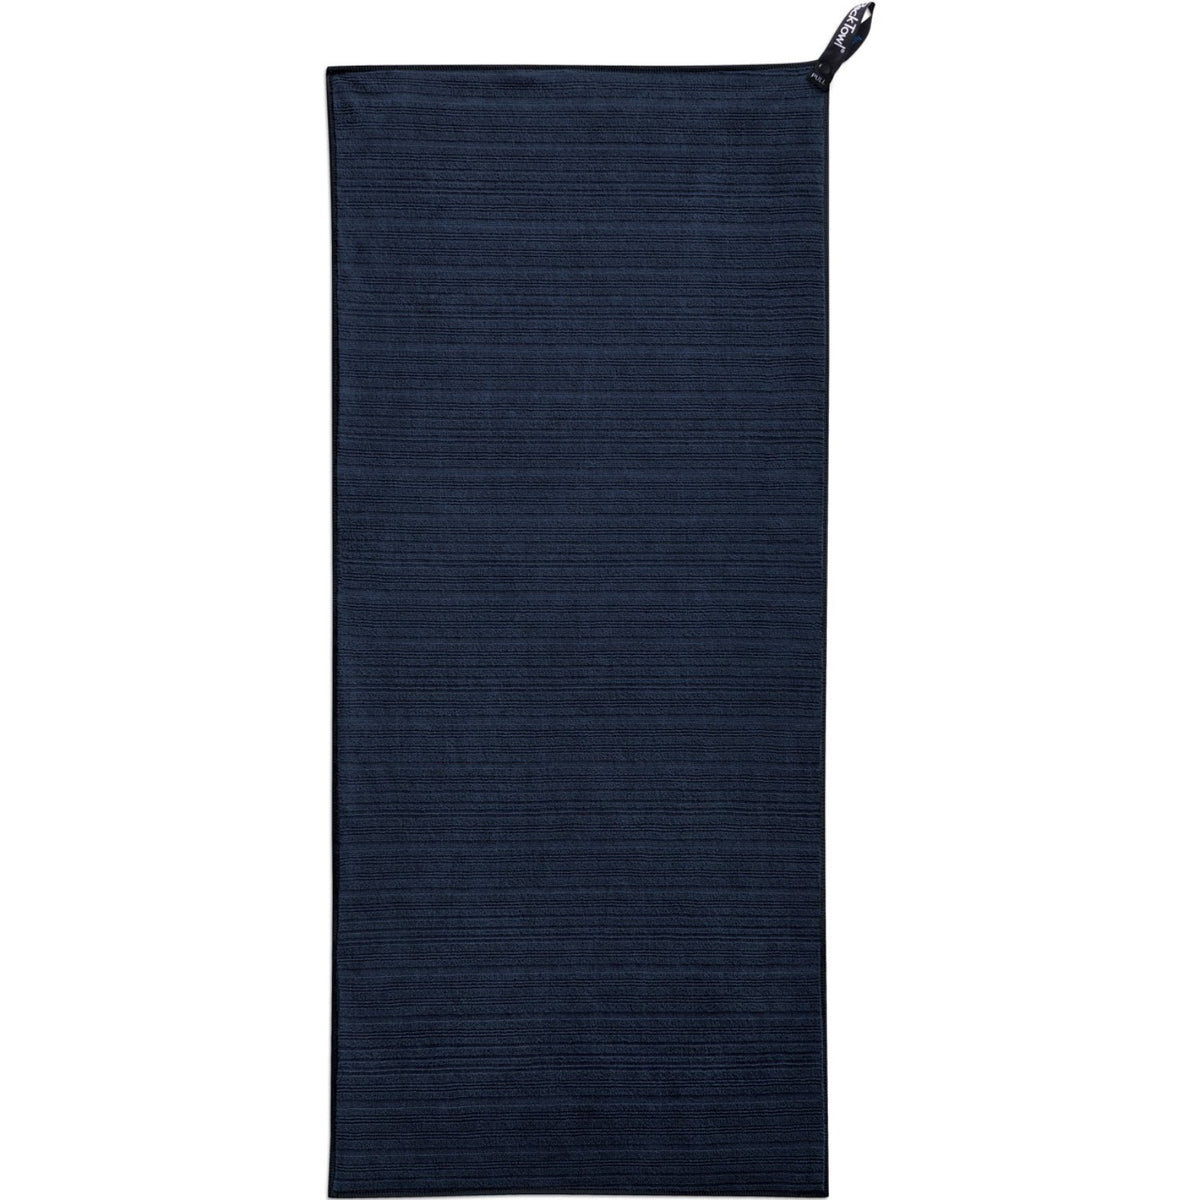 PackTowl Luxe Towel - Hand in midnight